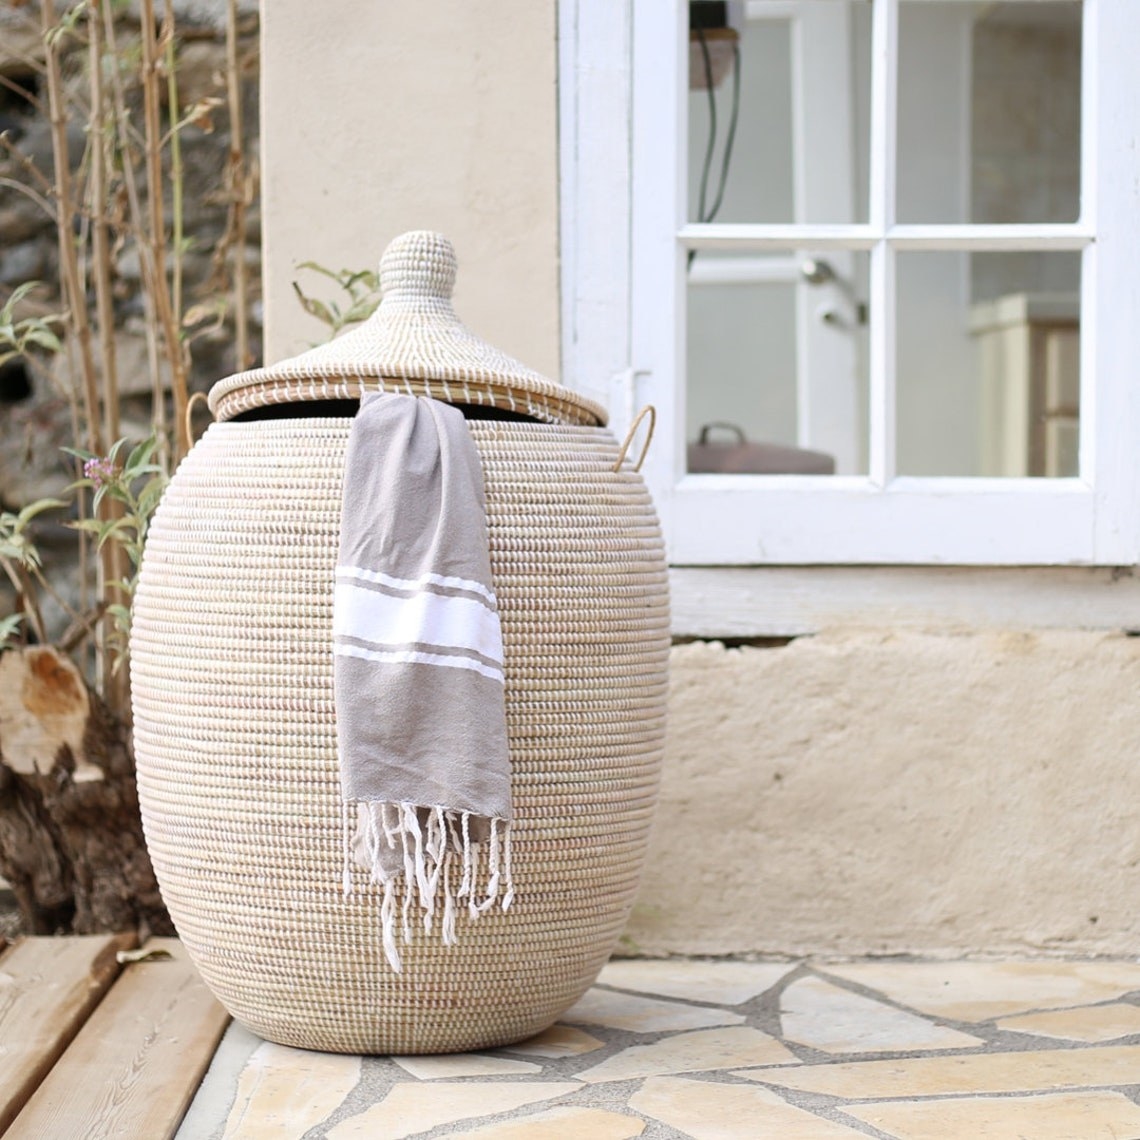 the large, egg-shaped lidded basket with a grey turkish towel peeping out